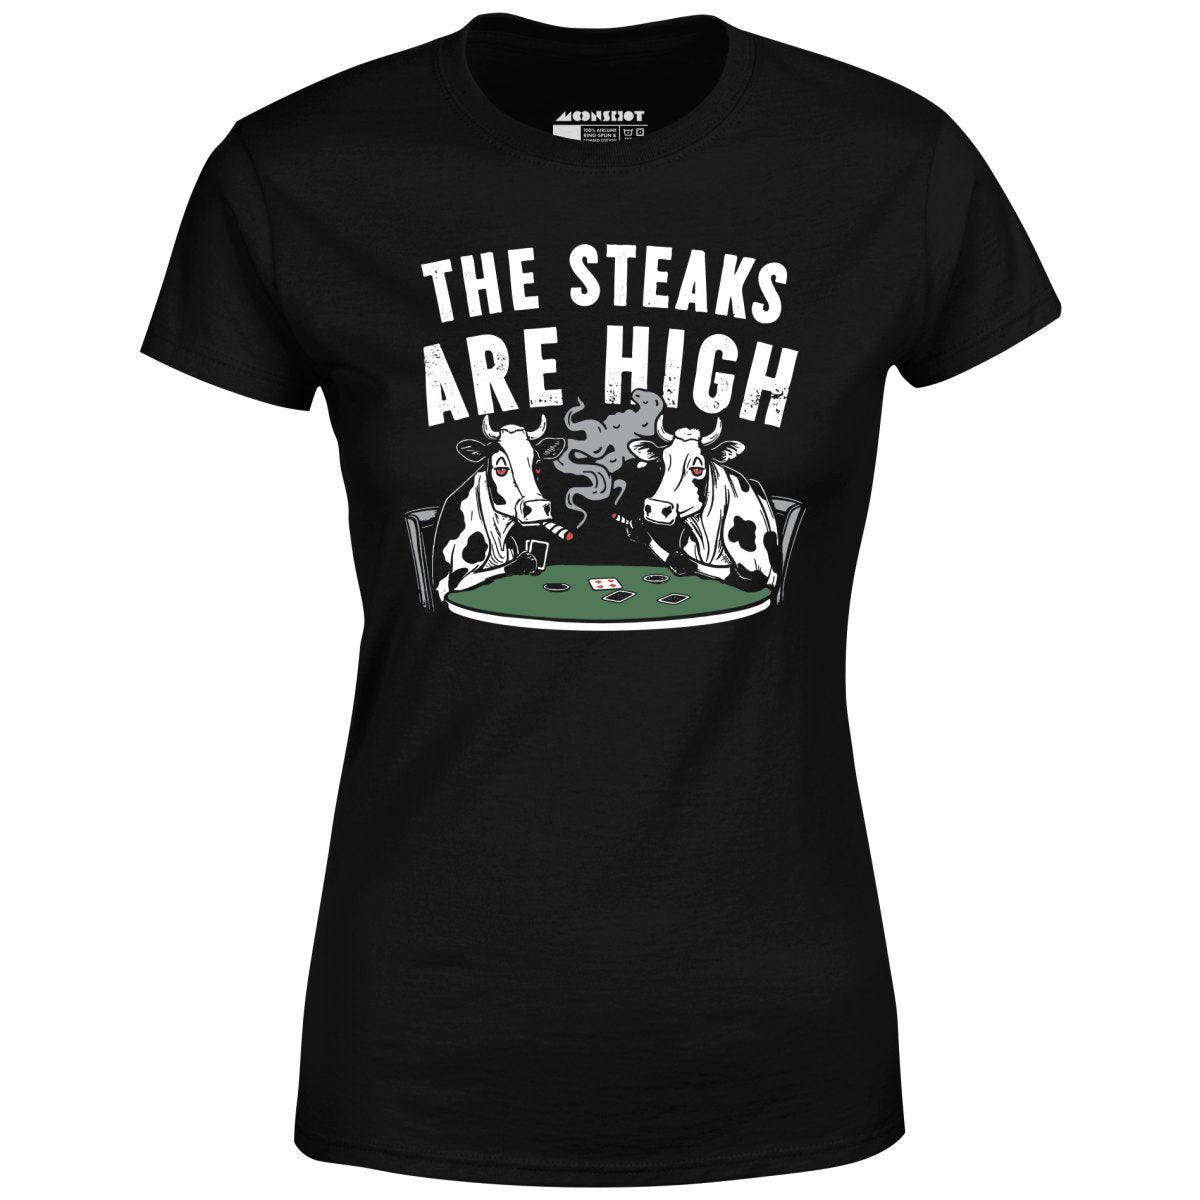 The Steaks Are High - Women's T-Shirt